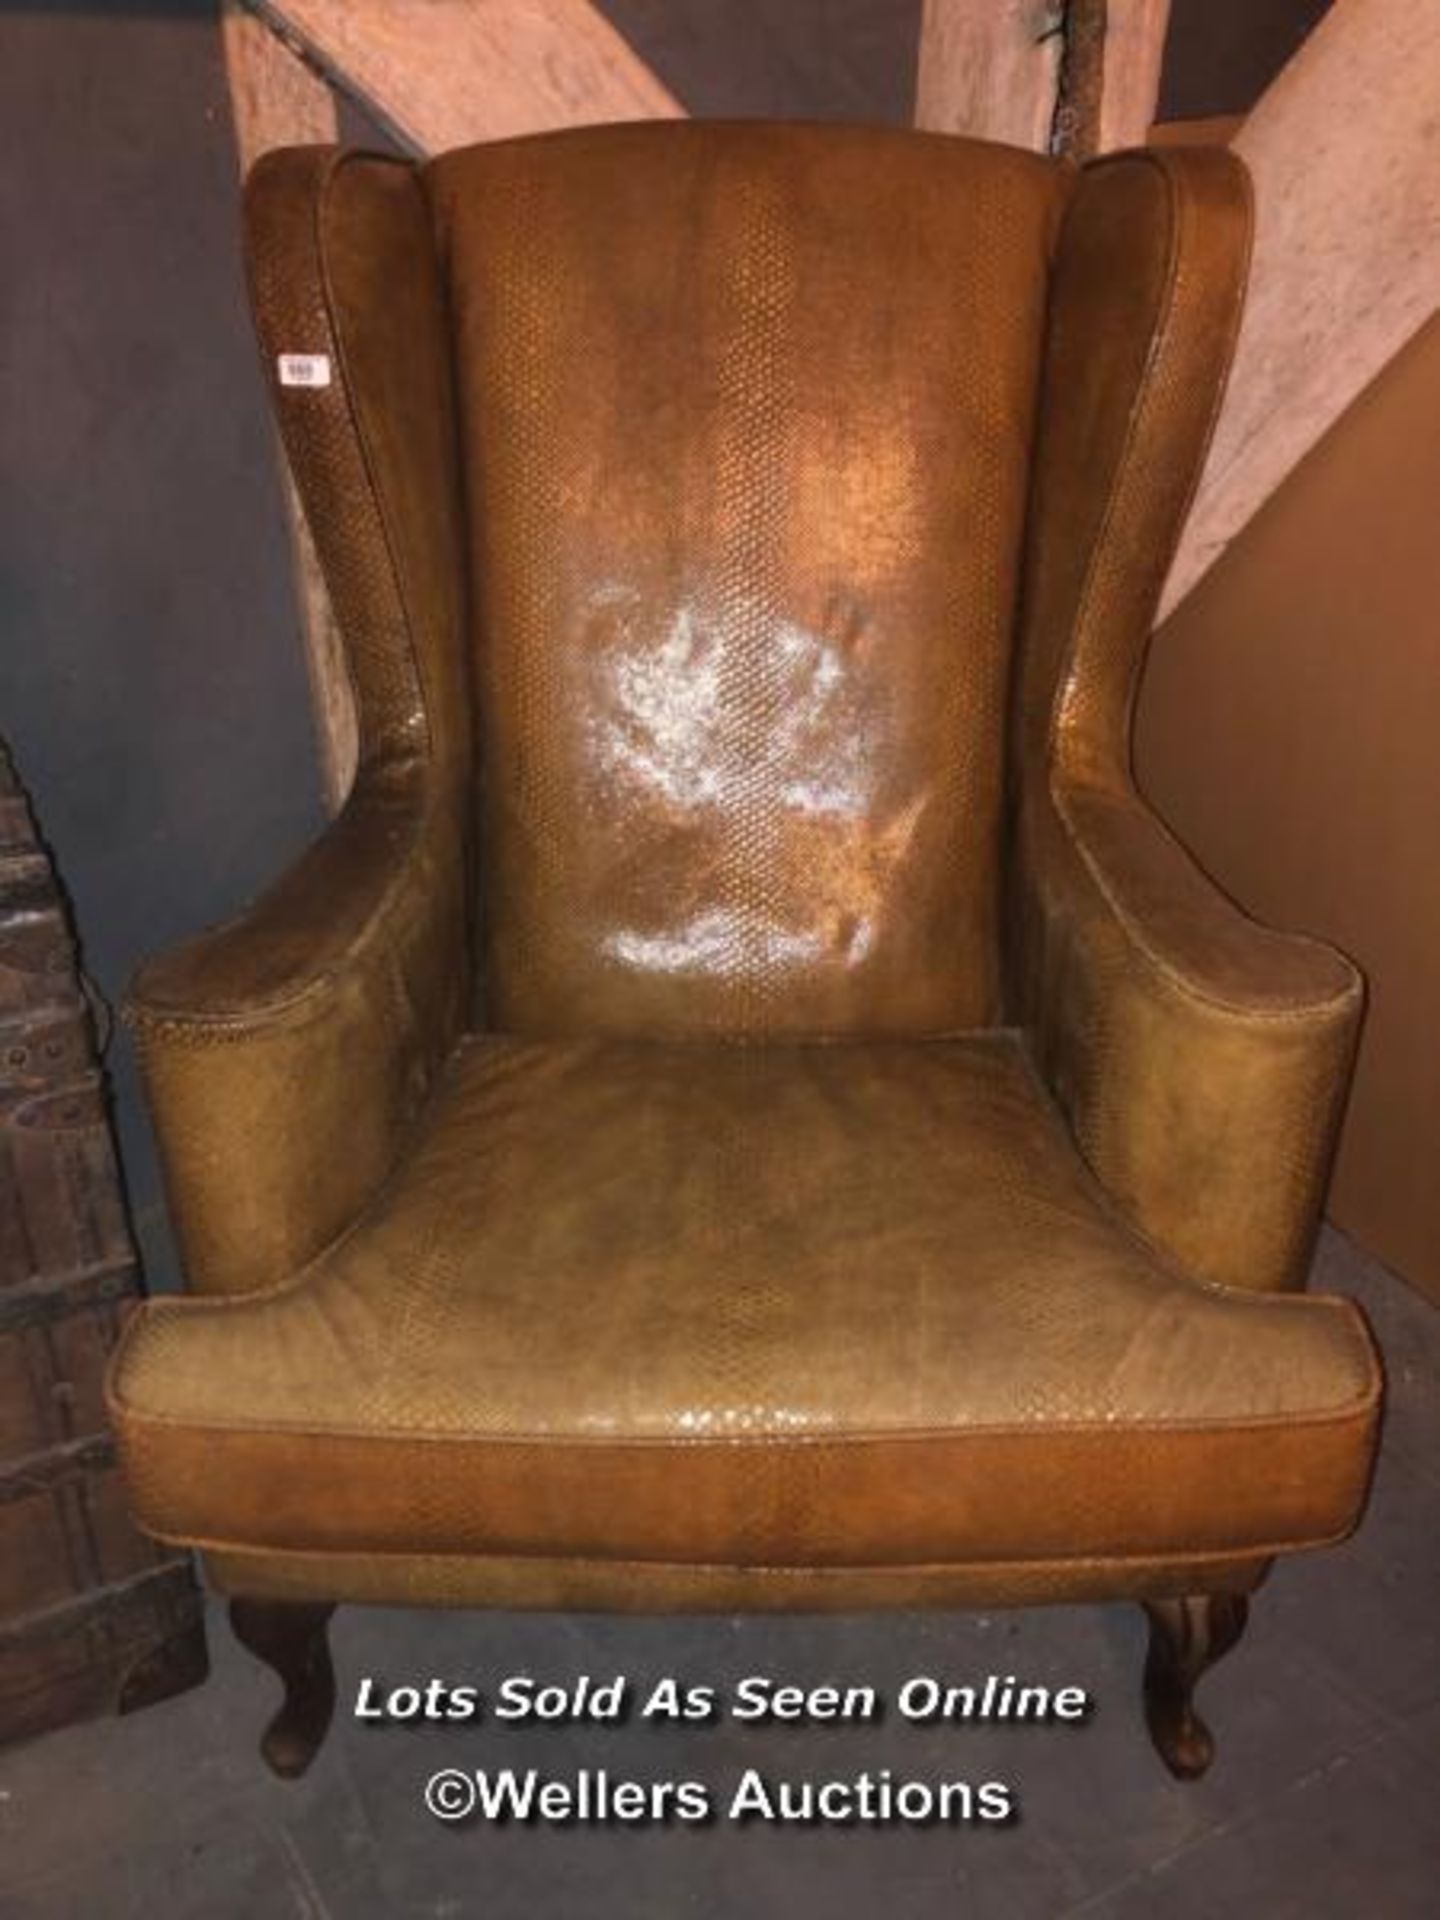 20TH CENTURY FAUX SNAKE SKIN LEATHER WING BACK CHAIR, CABRIOLE LEG, 74 X 65 X 110CM